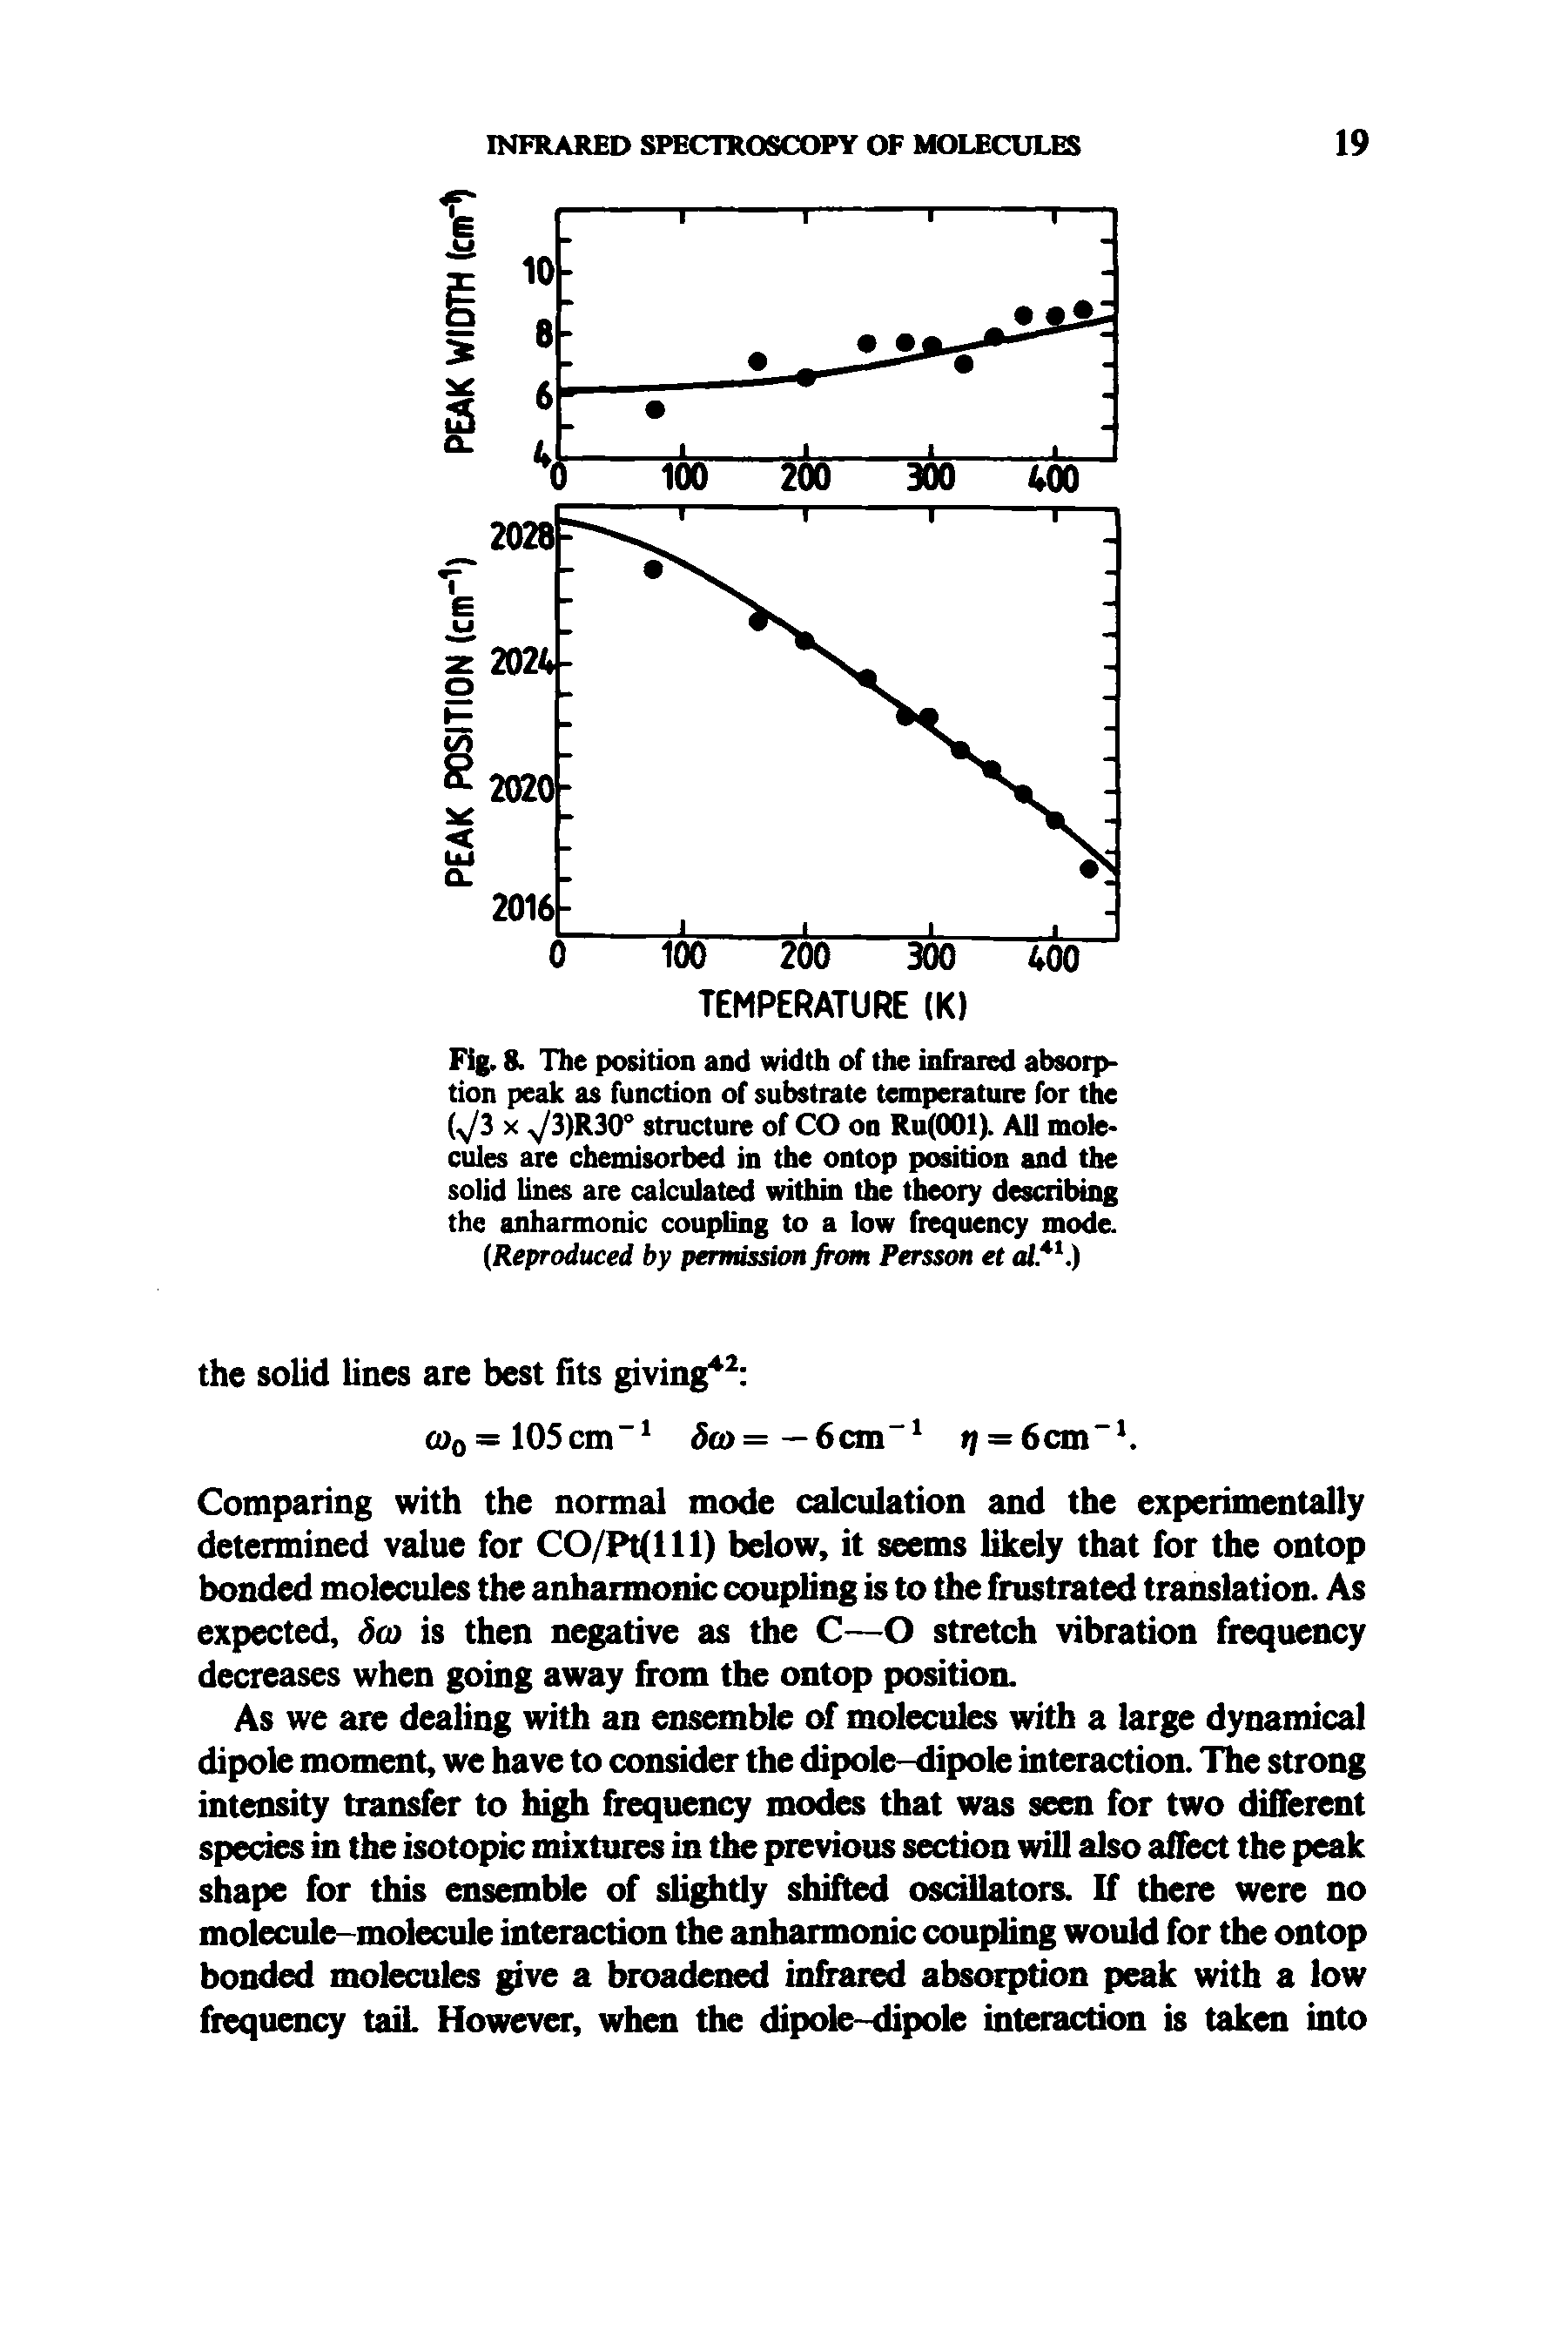 Fig. 8. The position and width of the infiraied absorption peak as function of substrate temperature for the ( 3 X 3)R30° structure of CO on Ru(001). All molecules are chemisorbed in the ontop position and the solid lines are calculated within the theory describing the anharmonic coupling to a low frequency mode.